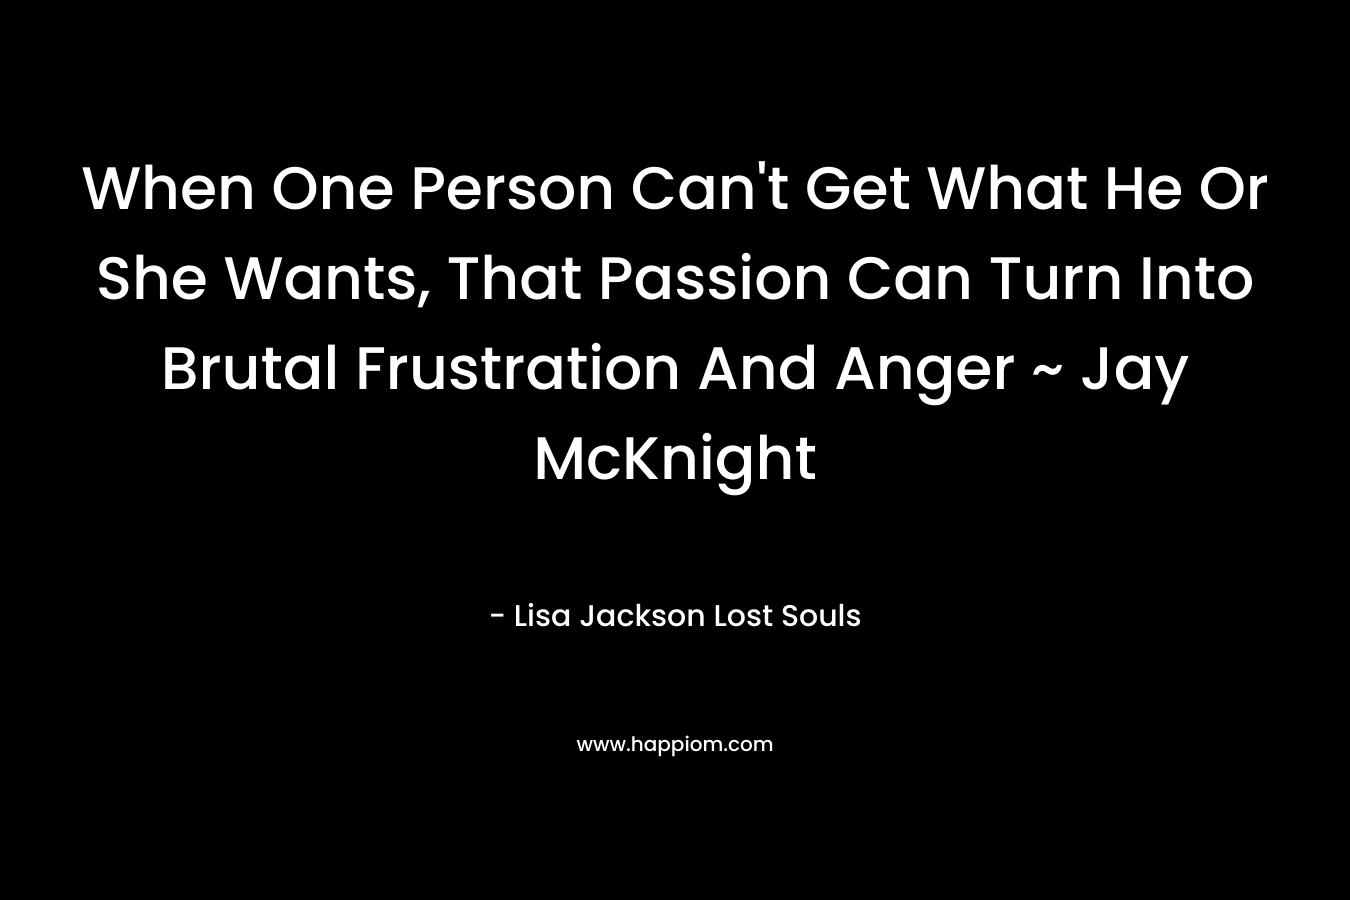 When One Person Can't Get What He Or She Wants, That Passion Can Turn Into Brutal Frustration And Anger ~ Jay McKnight